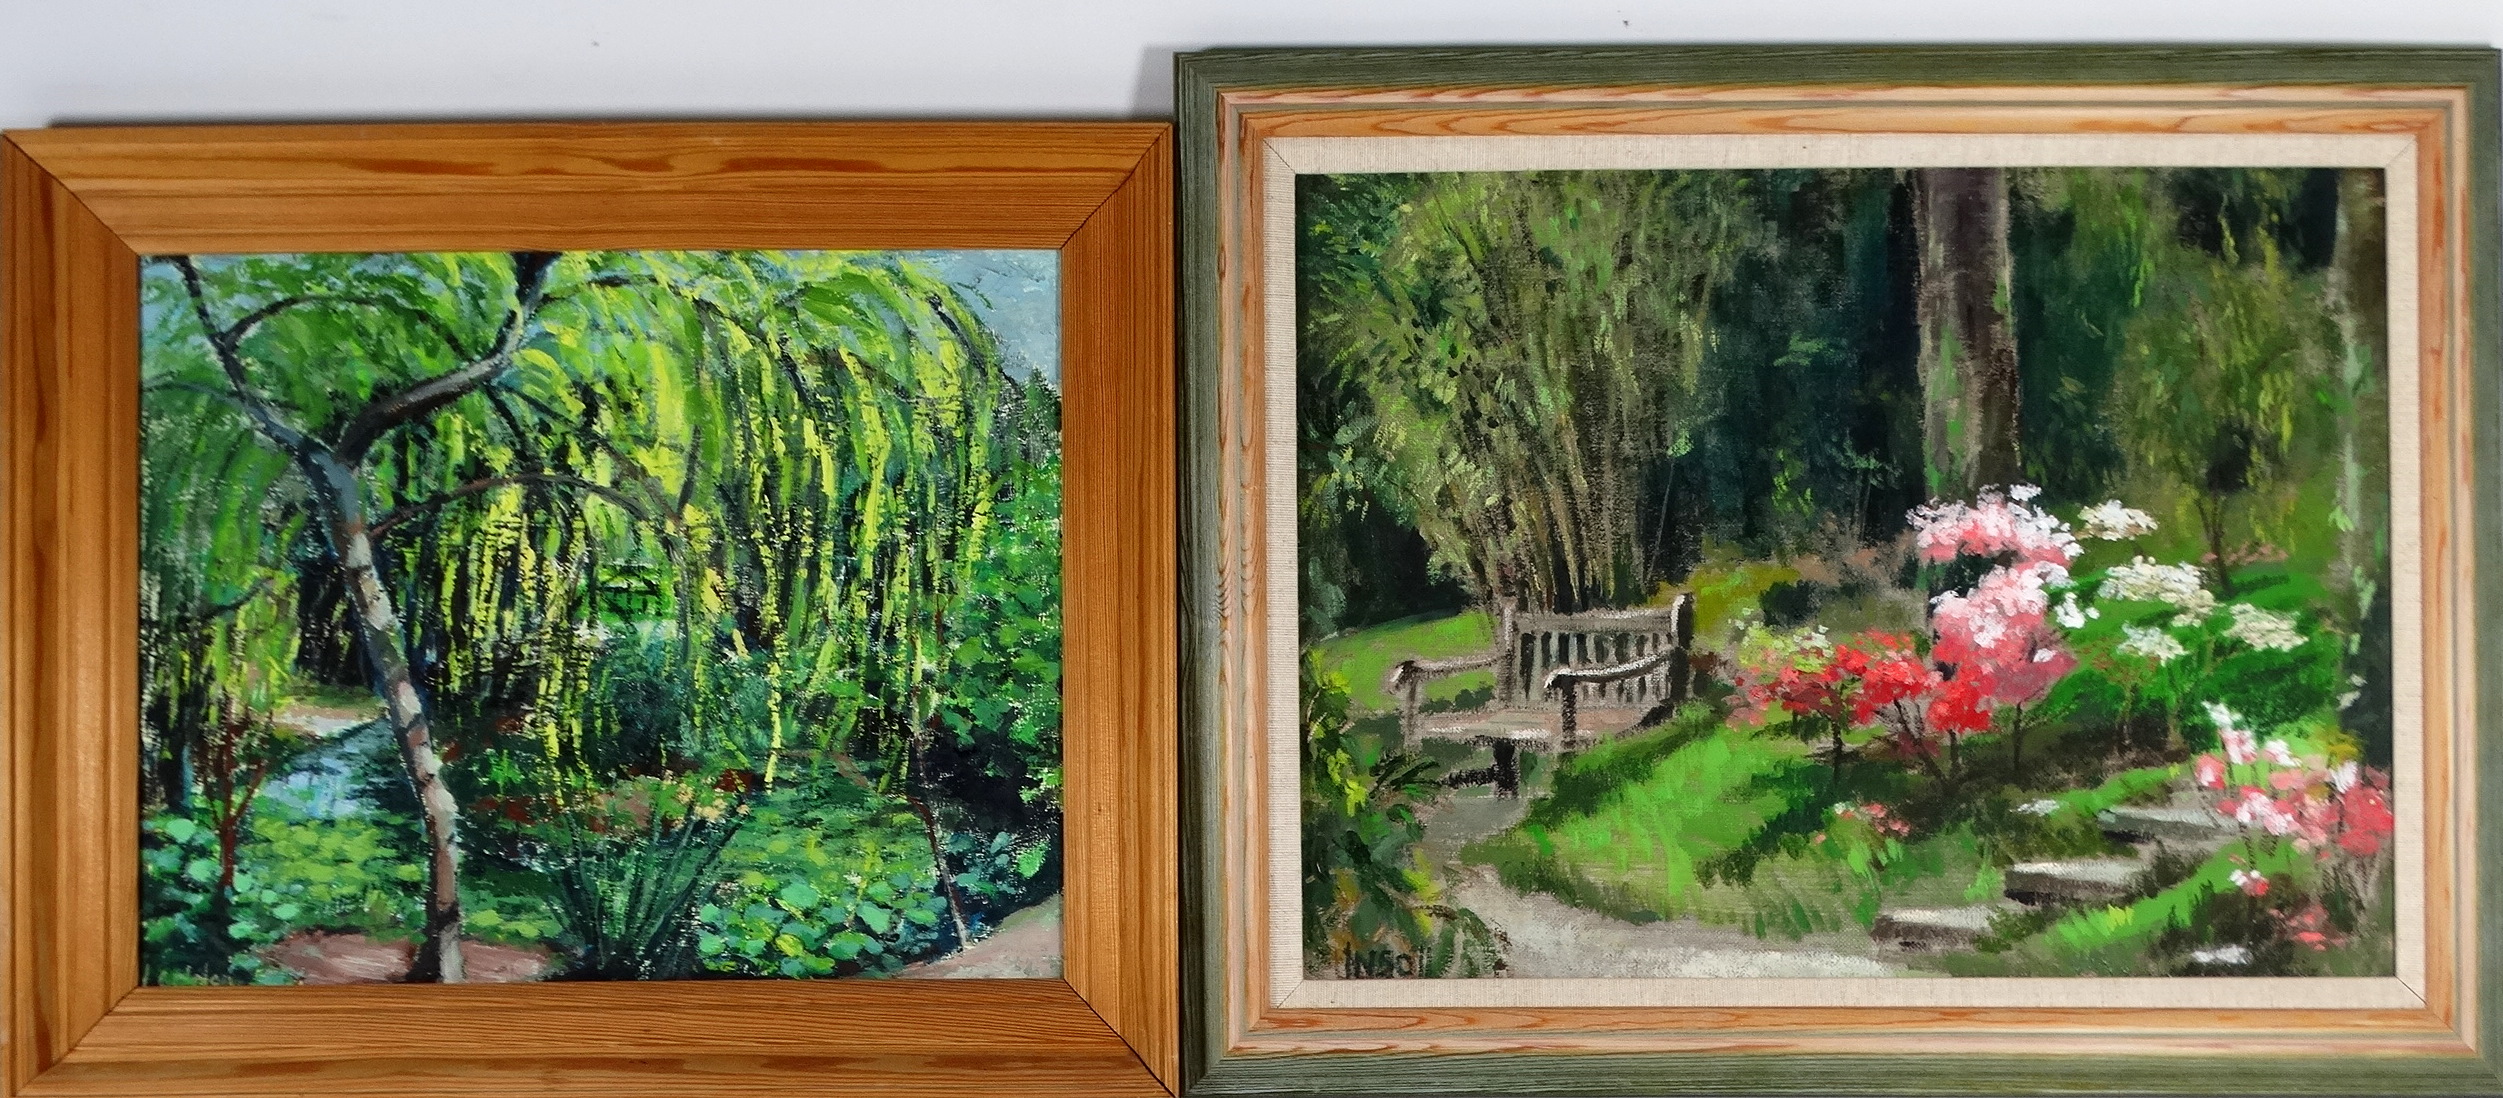 # Chris INSOLL (British b. 1956) Quite Garden Bench Oil on canvas Signed lower left, gallery label